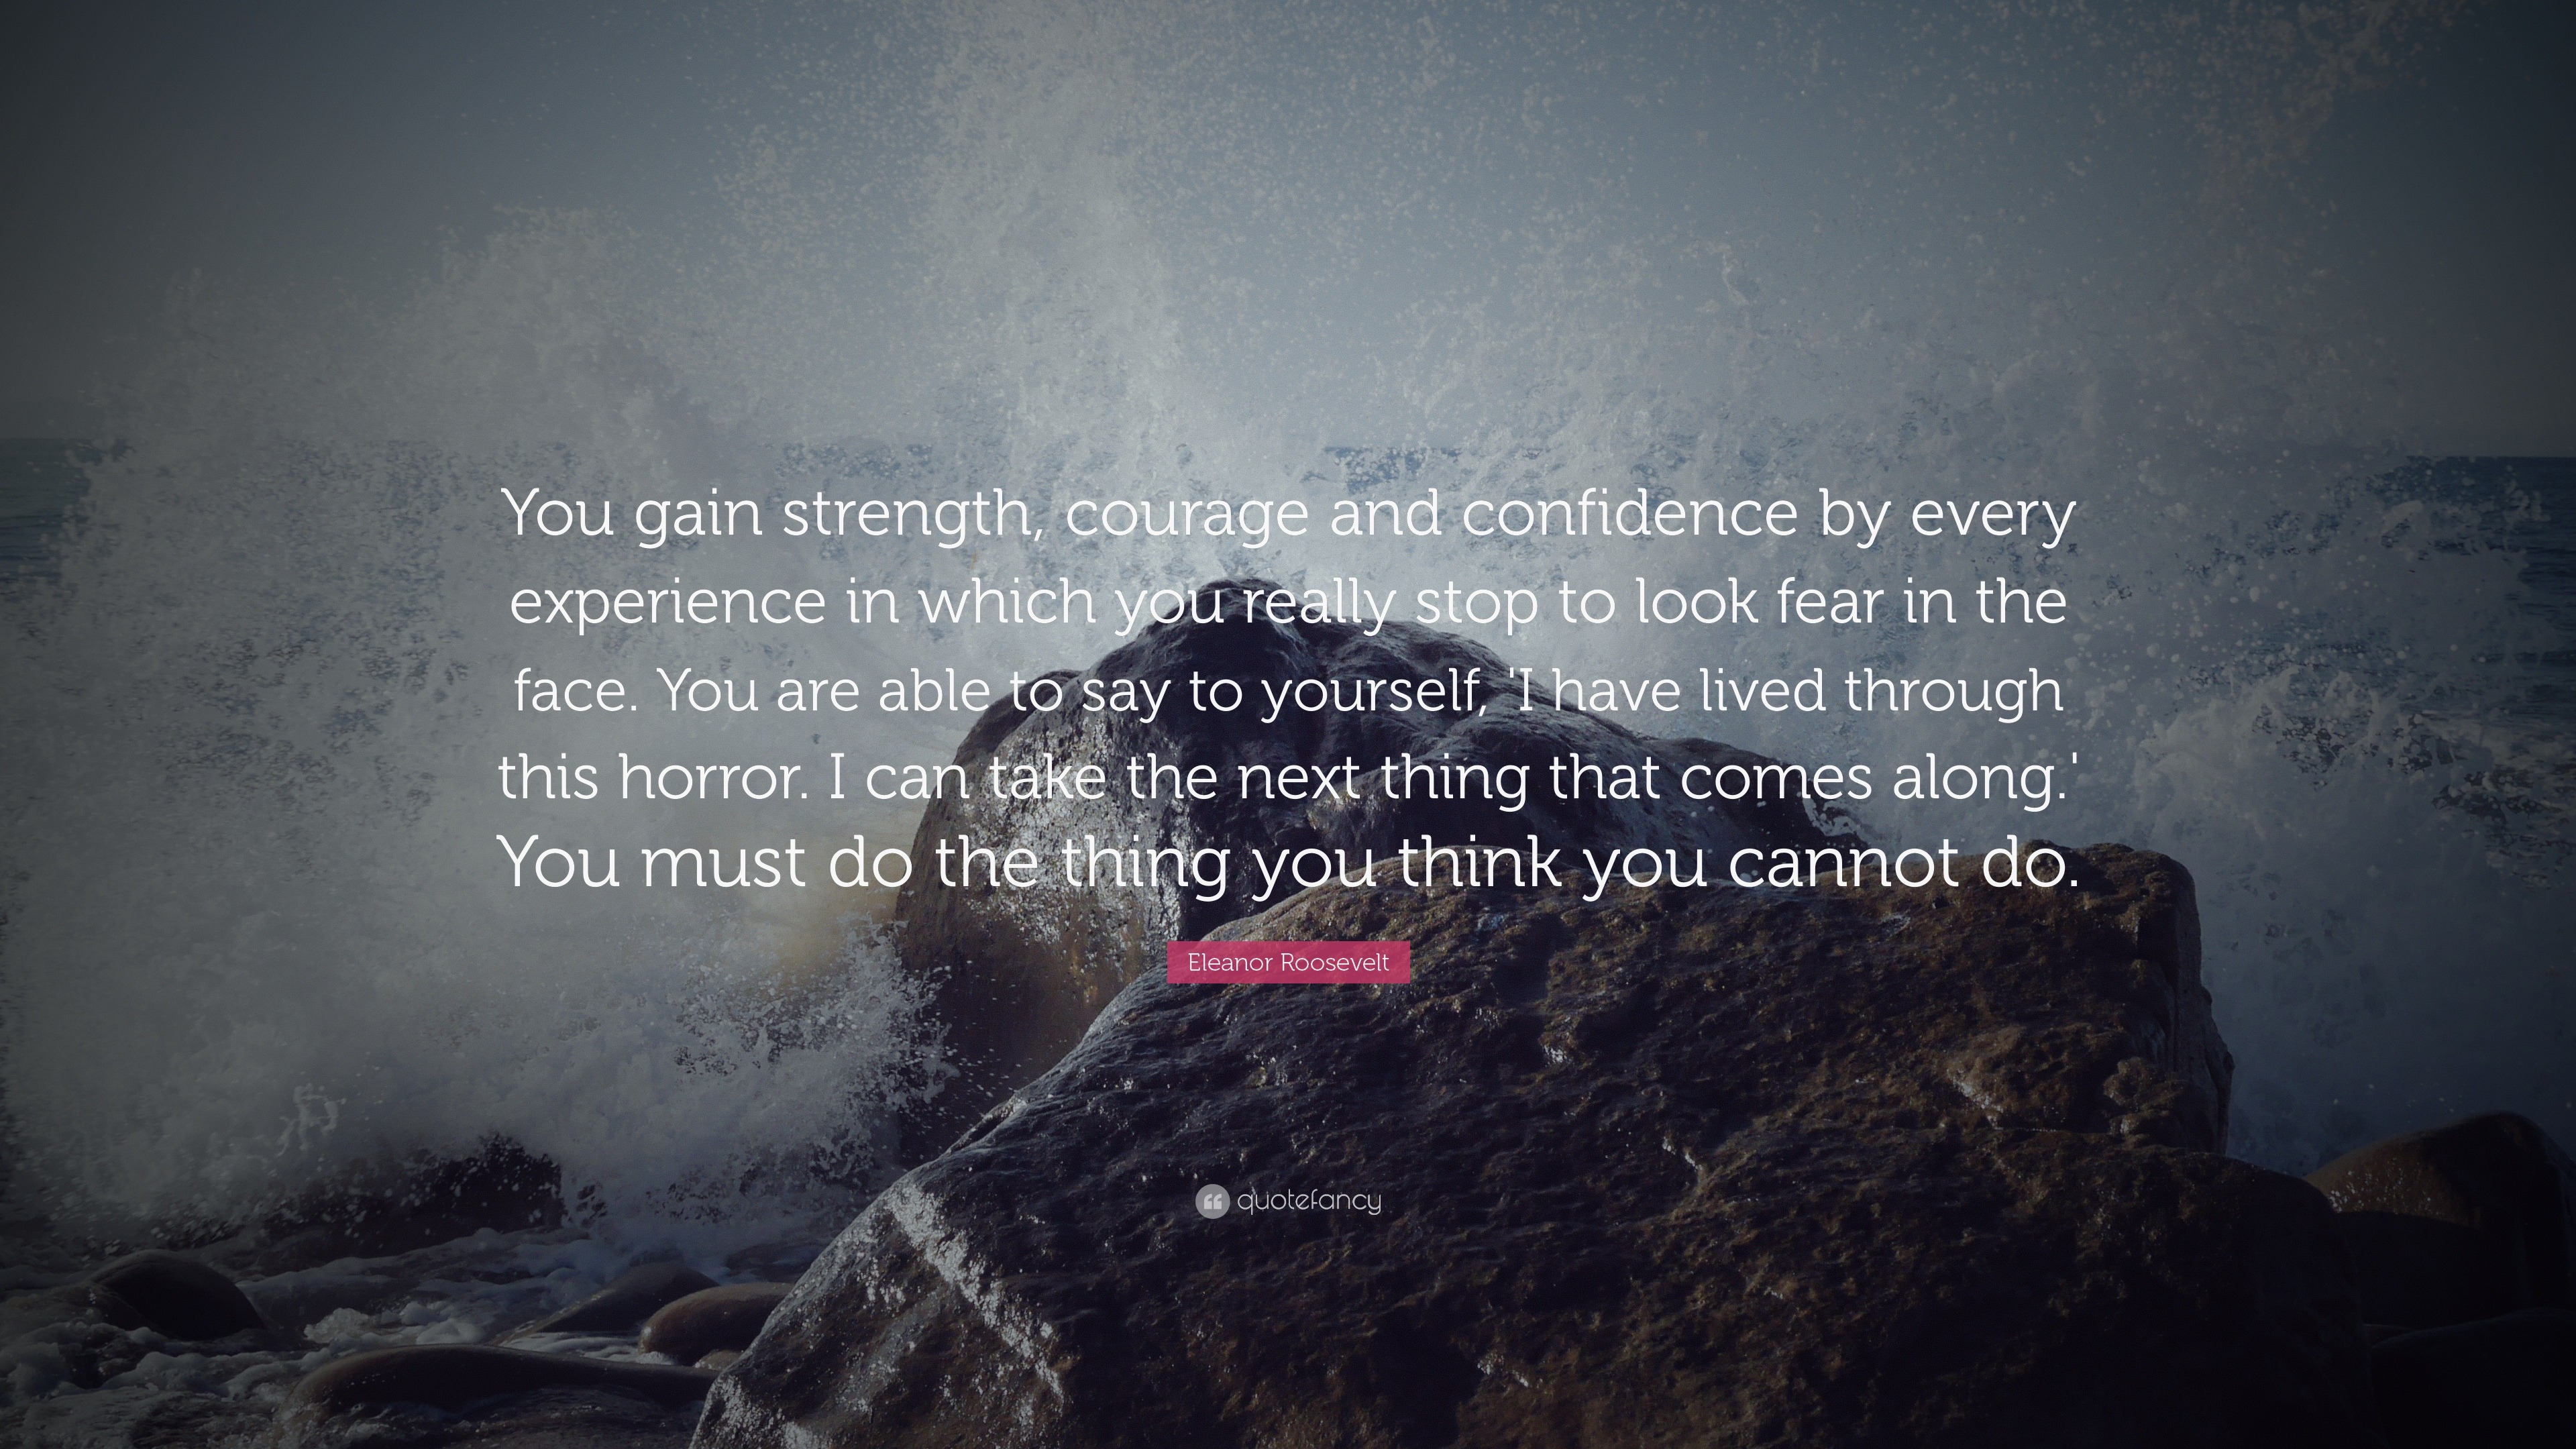 Eleanor Roosevelt Quote: “You gain strength, courage and confidence by ...